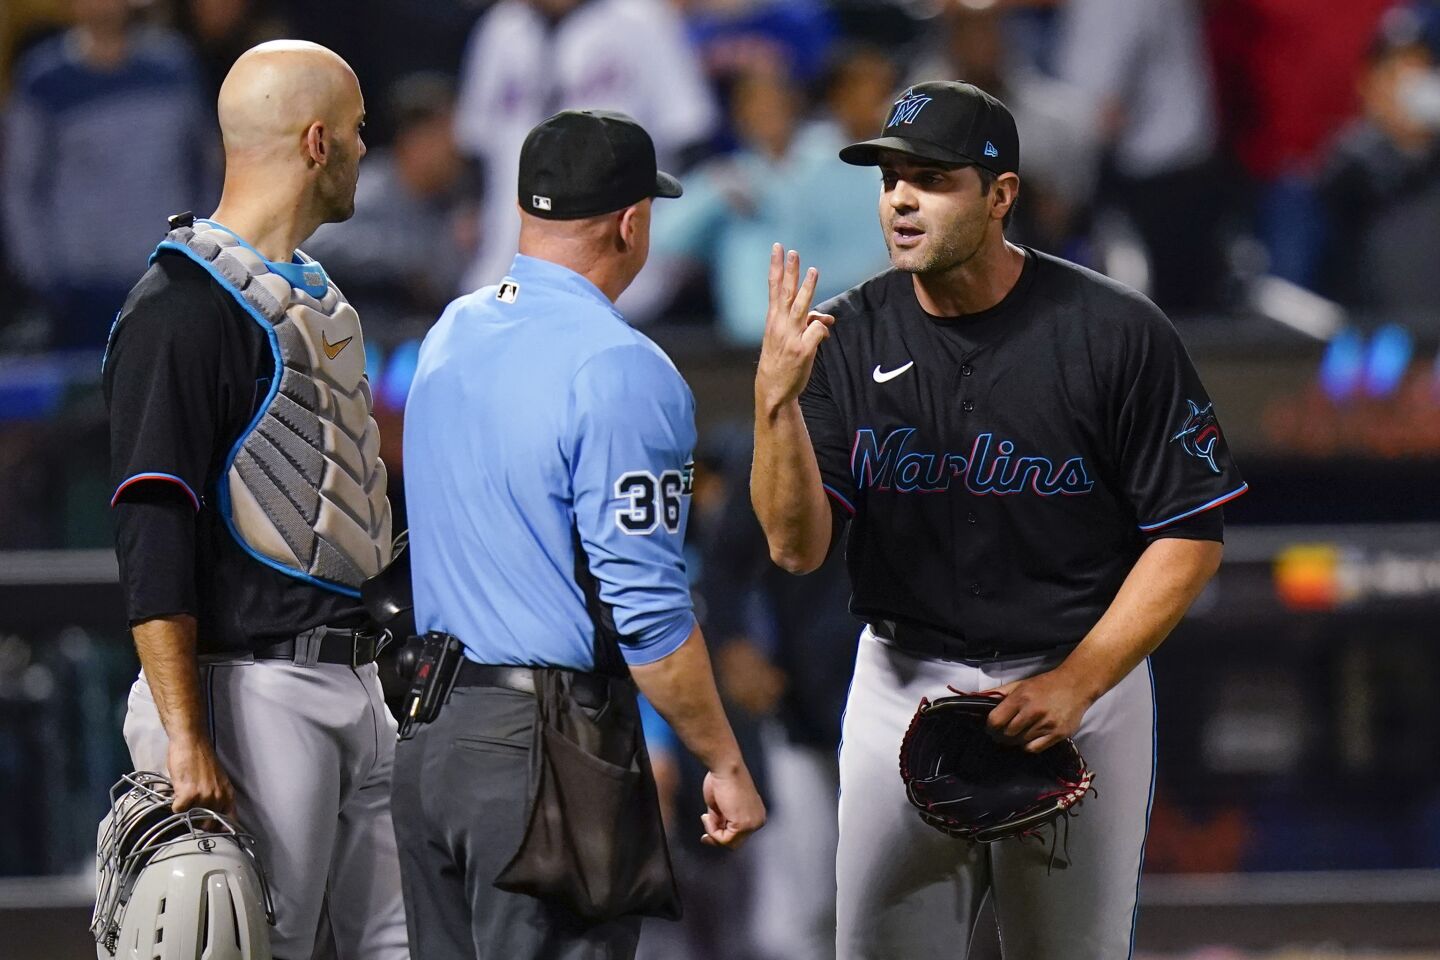 22 | Miami Marlins (67-92; LW: 24)Richard Bleier’s three-balk at-bat on Tuesday was a day to forget, except it might be the only thing he’s remembered for as no pitcher had ever been flagged three times for that offense in the same at-bat. Shoot, Bleier had never even balked in his career before then.